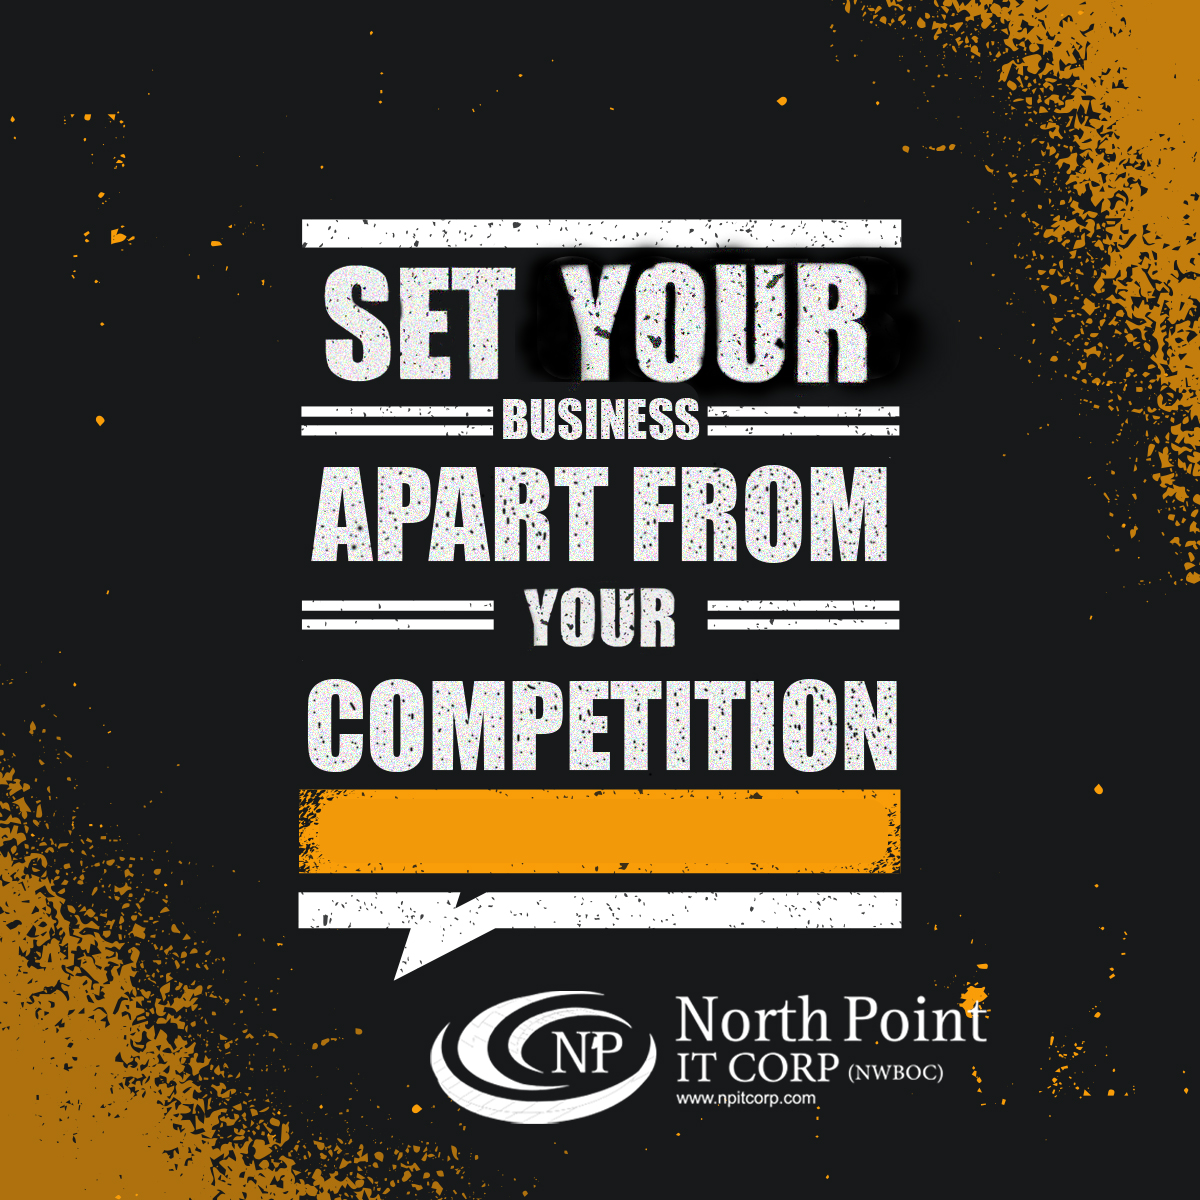 set your business apart from your competition.

#NorthPoint #hrconsultant #newjobs #creativity #training #motivation #leadershipskills #success #leadershipdevelopment #federalgovernment #services #talented #business #Setgoals #competition #motivational #quote